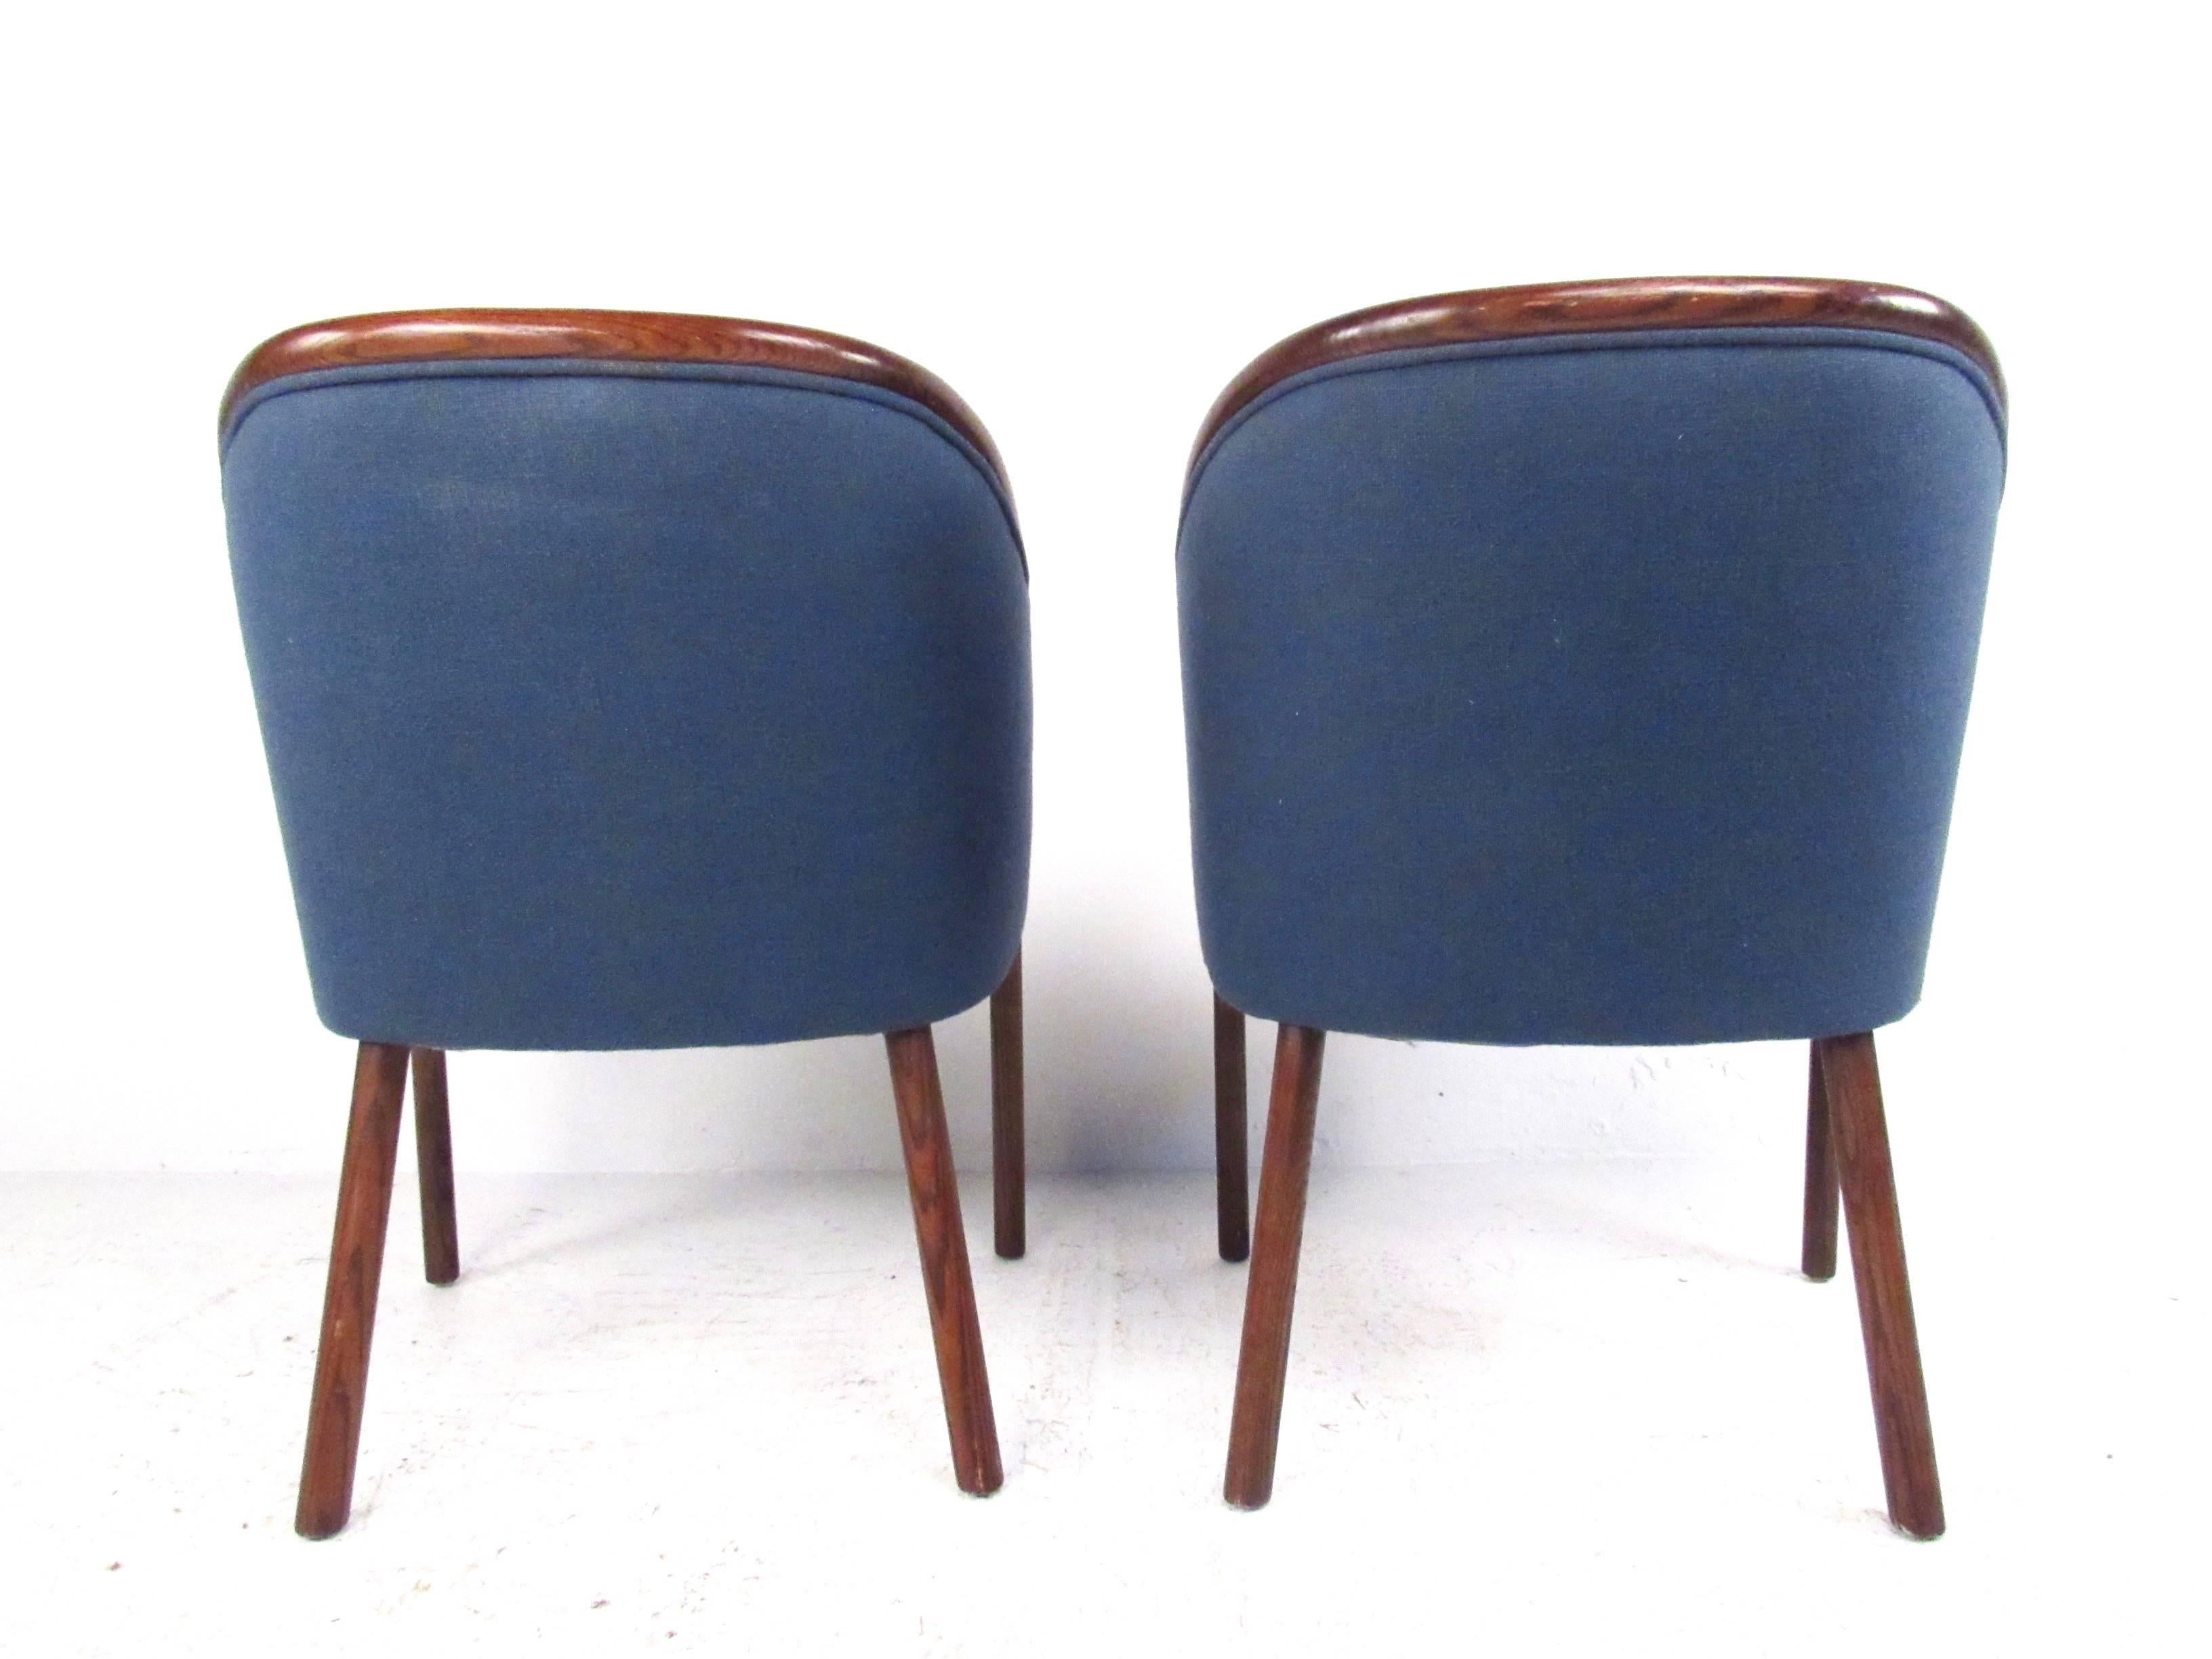 Fabric Pair of Mid-Century Modern Rosewood Side Chairs